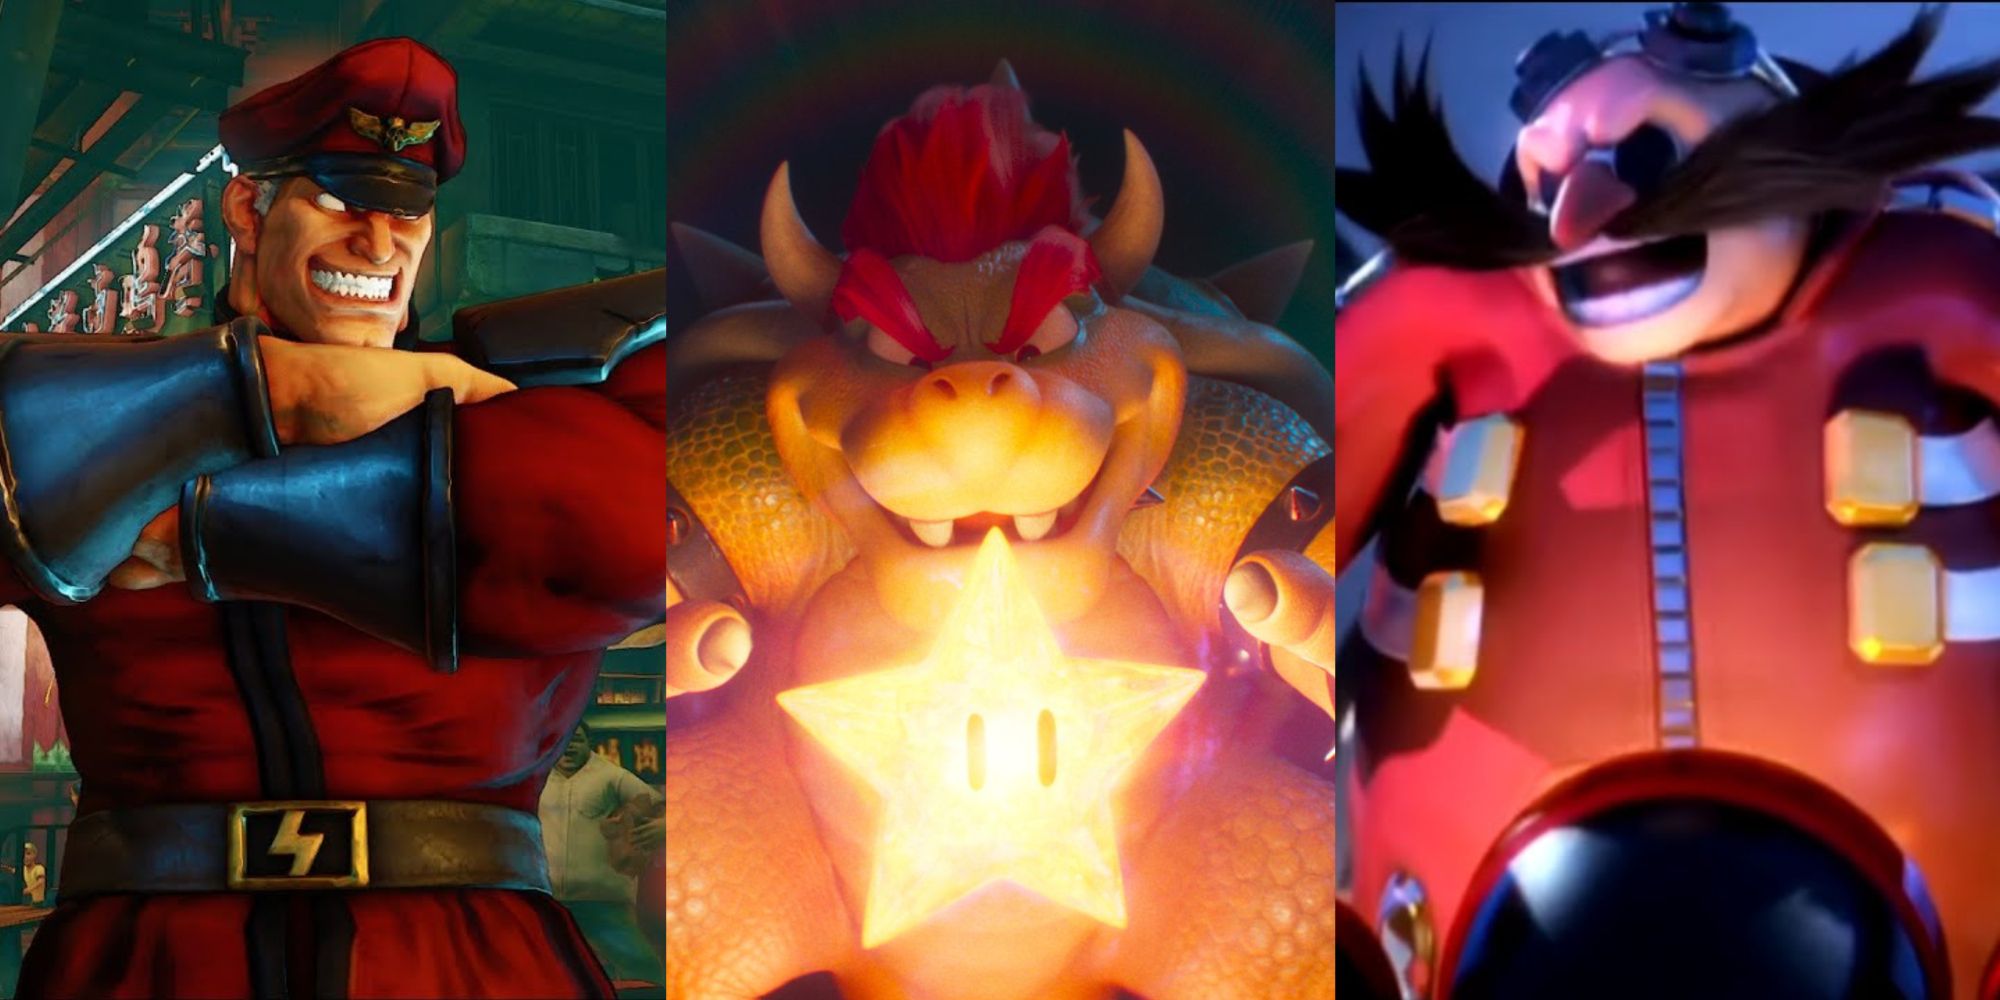 M. Bison Grinning, Bowser With A Star, Eggman Laughing